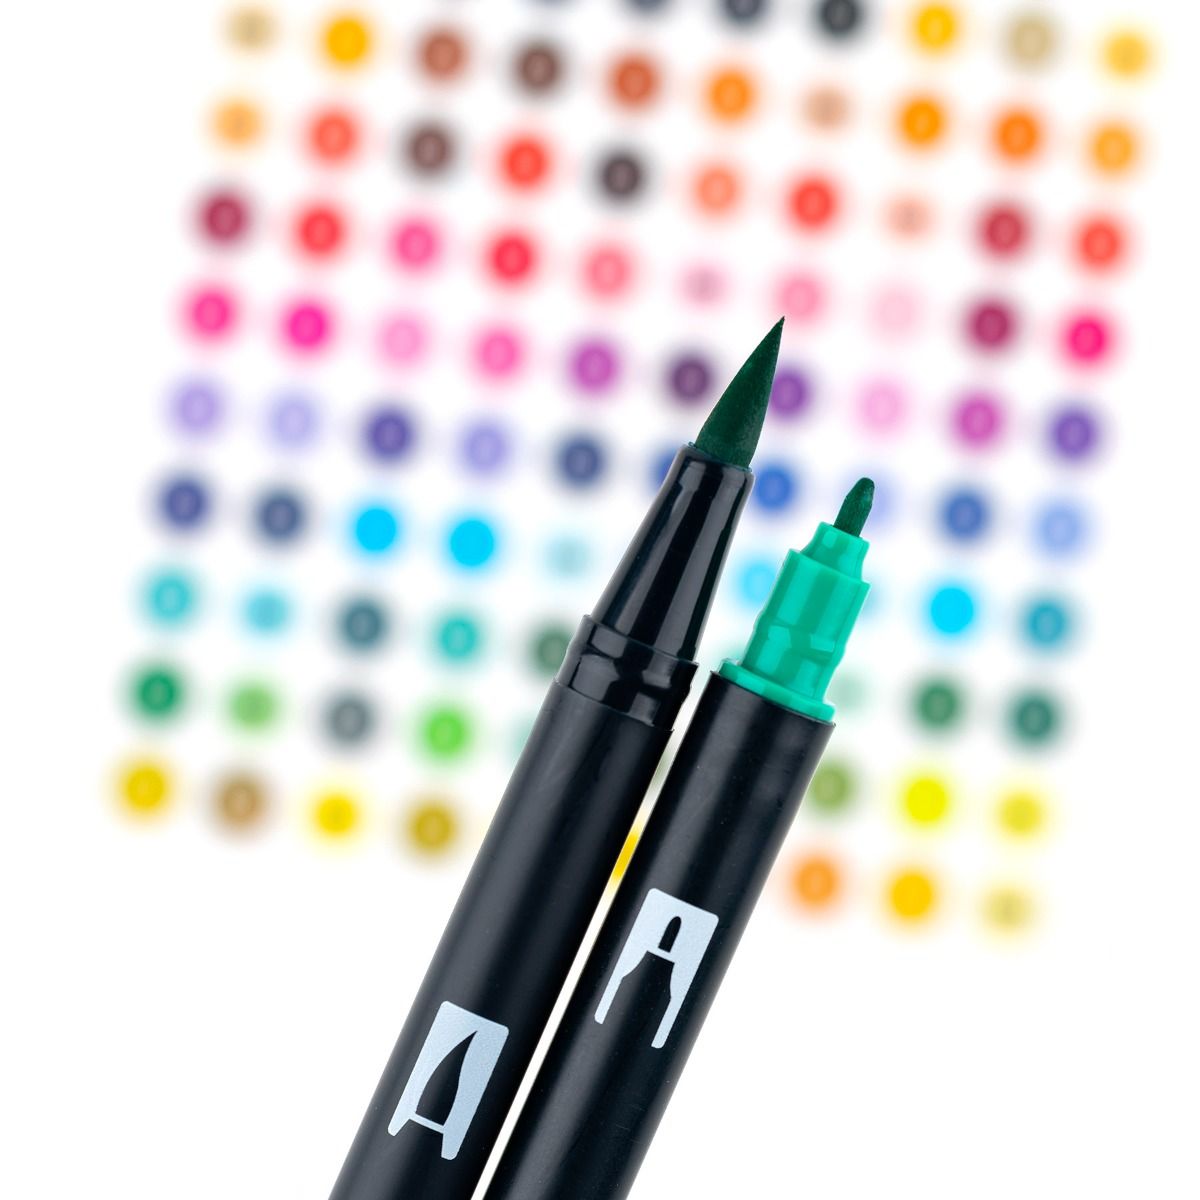 Tombow Dual Brush Marker - Galaxy Palette